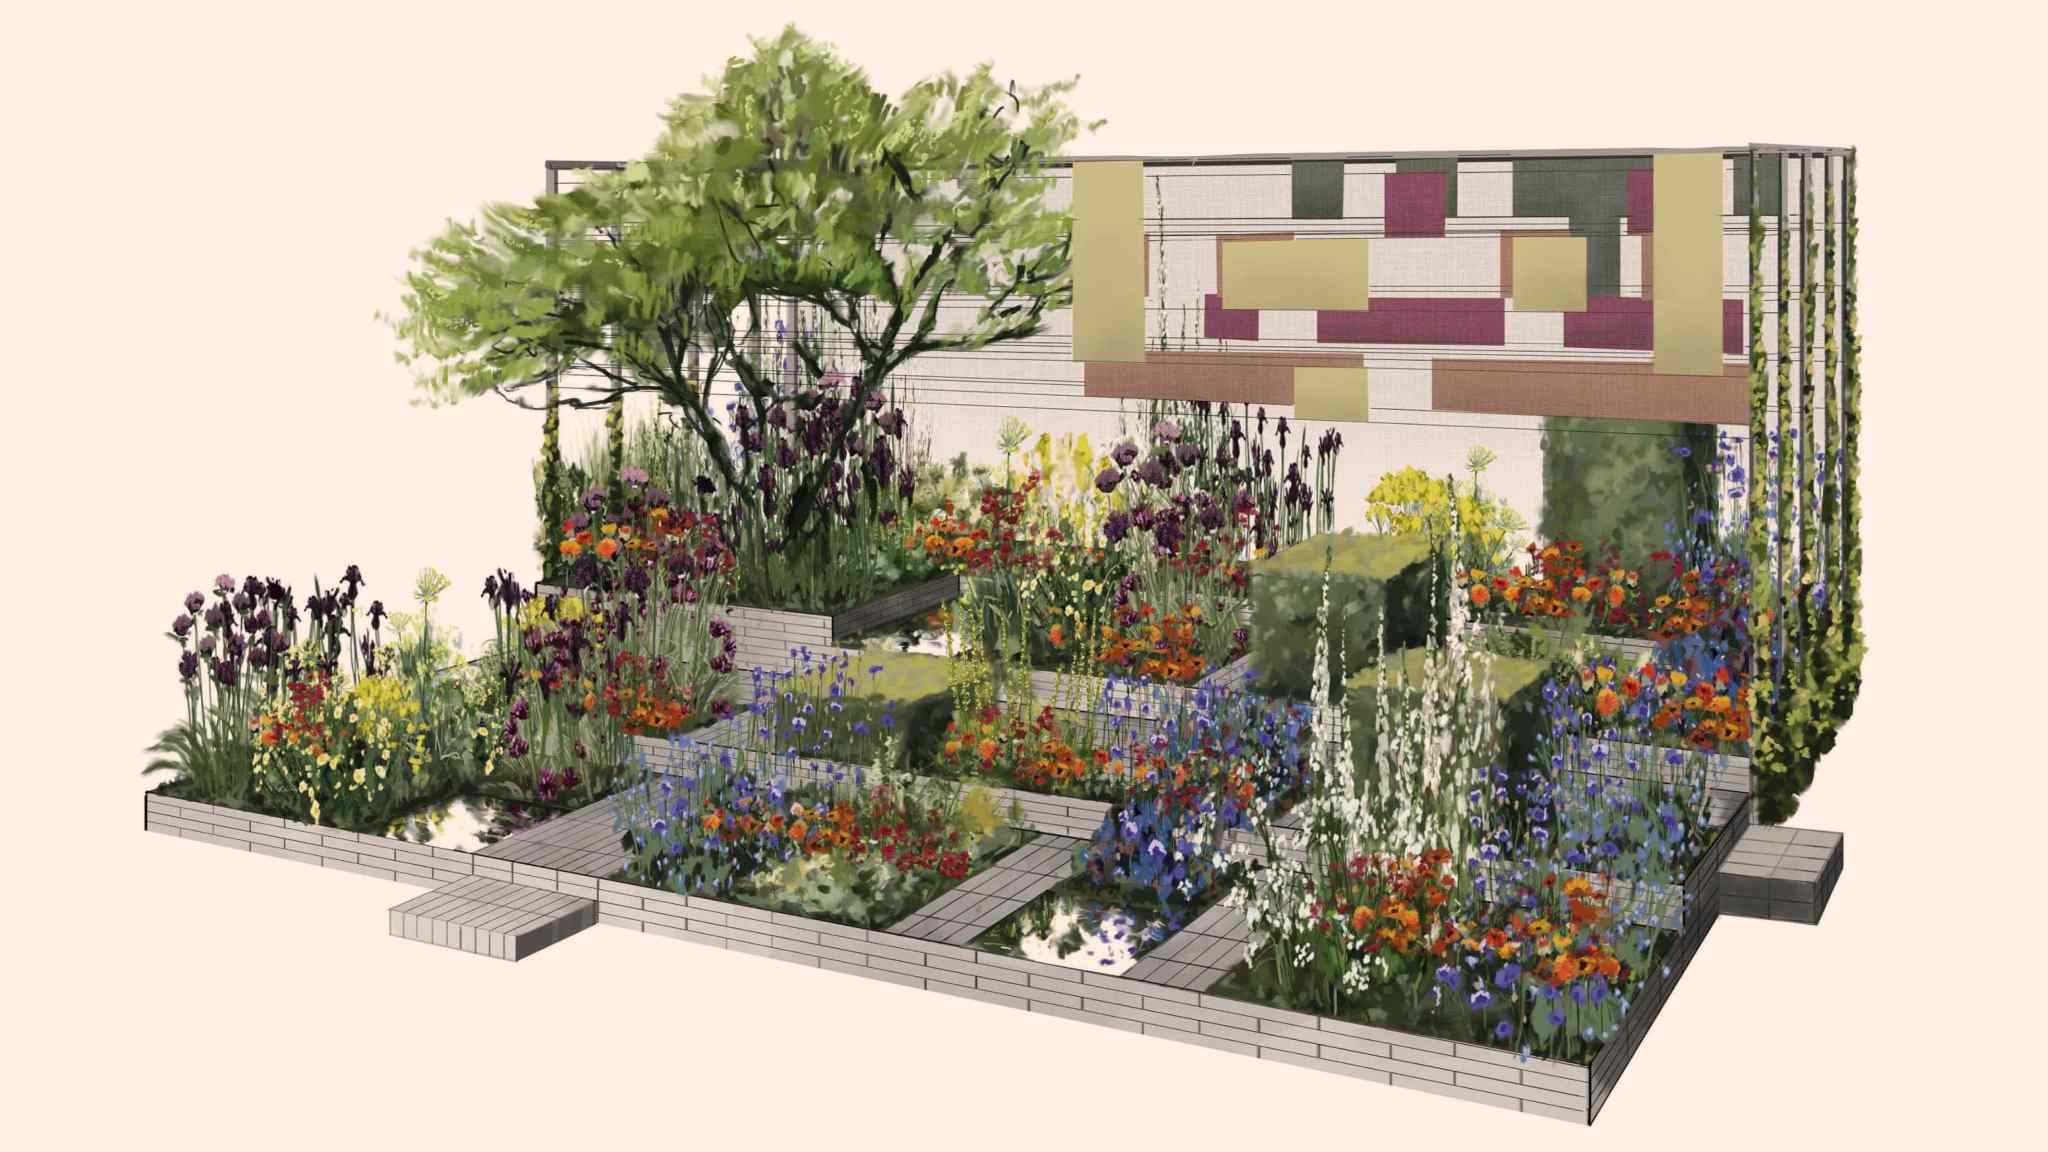 The new faces of horticulture at the Chelsea Flower Show